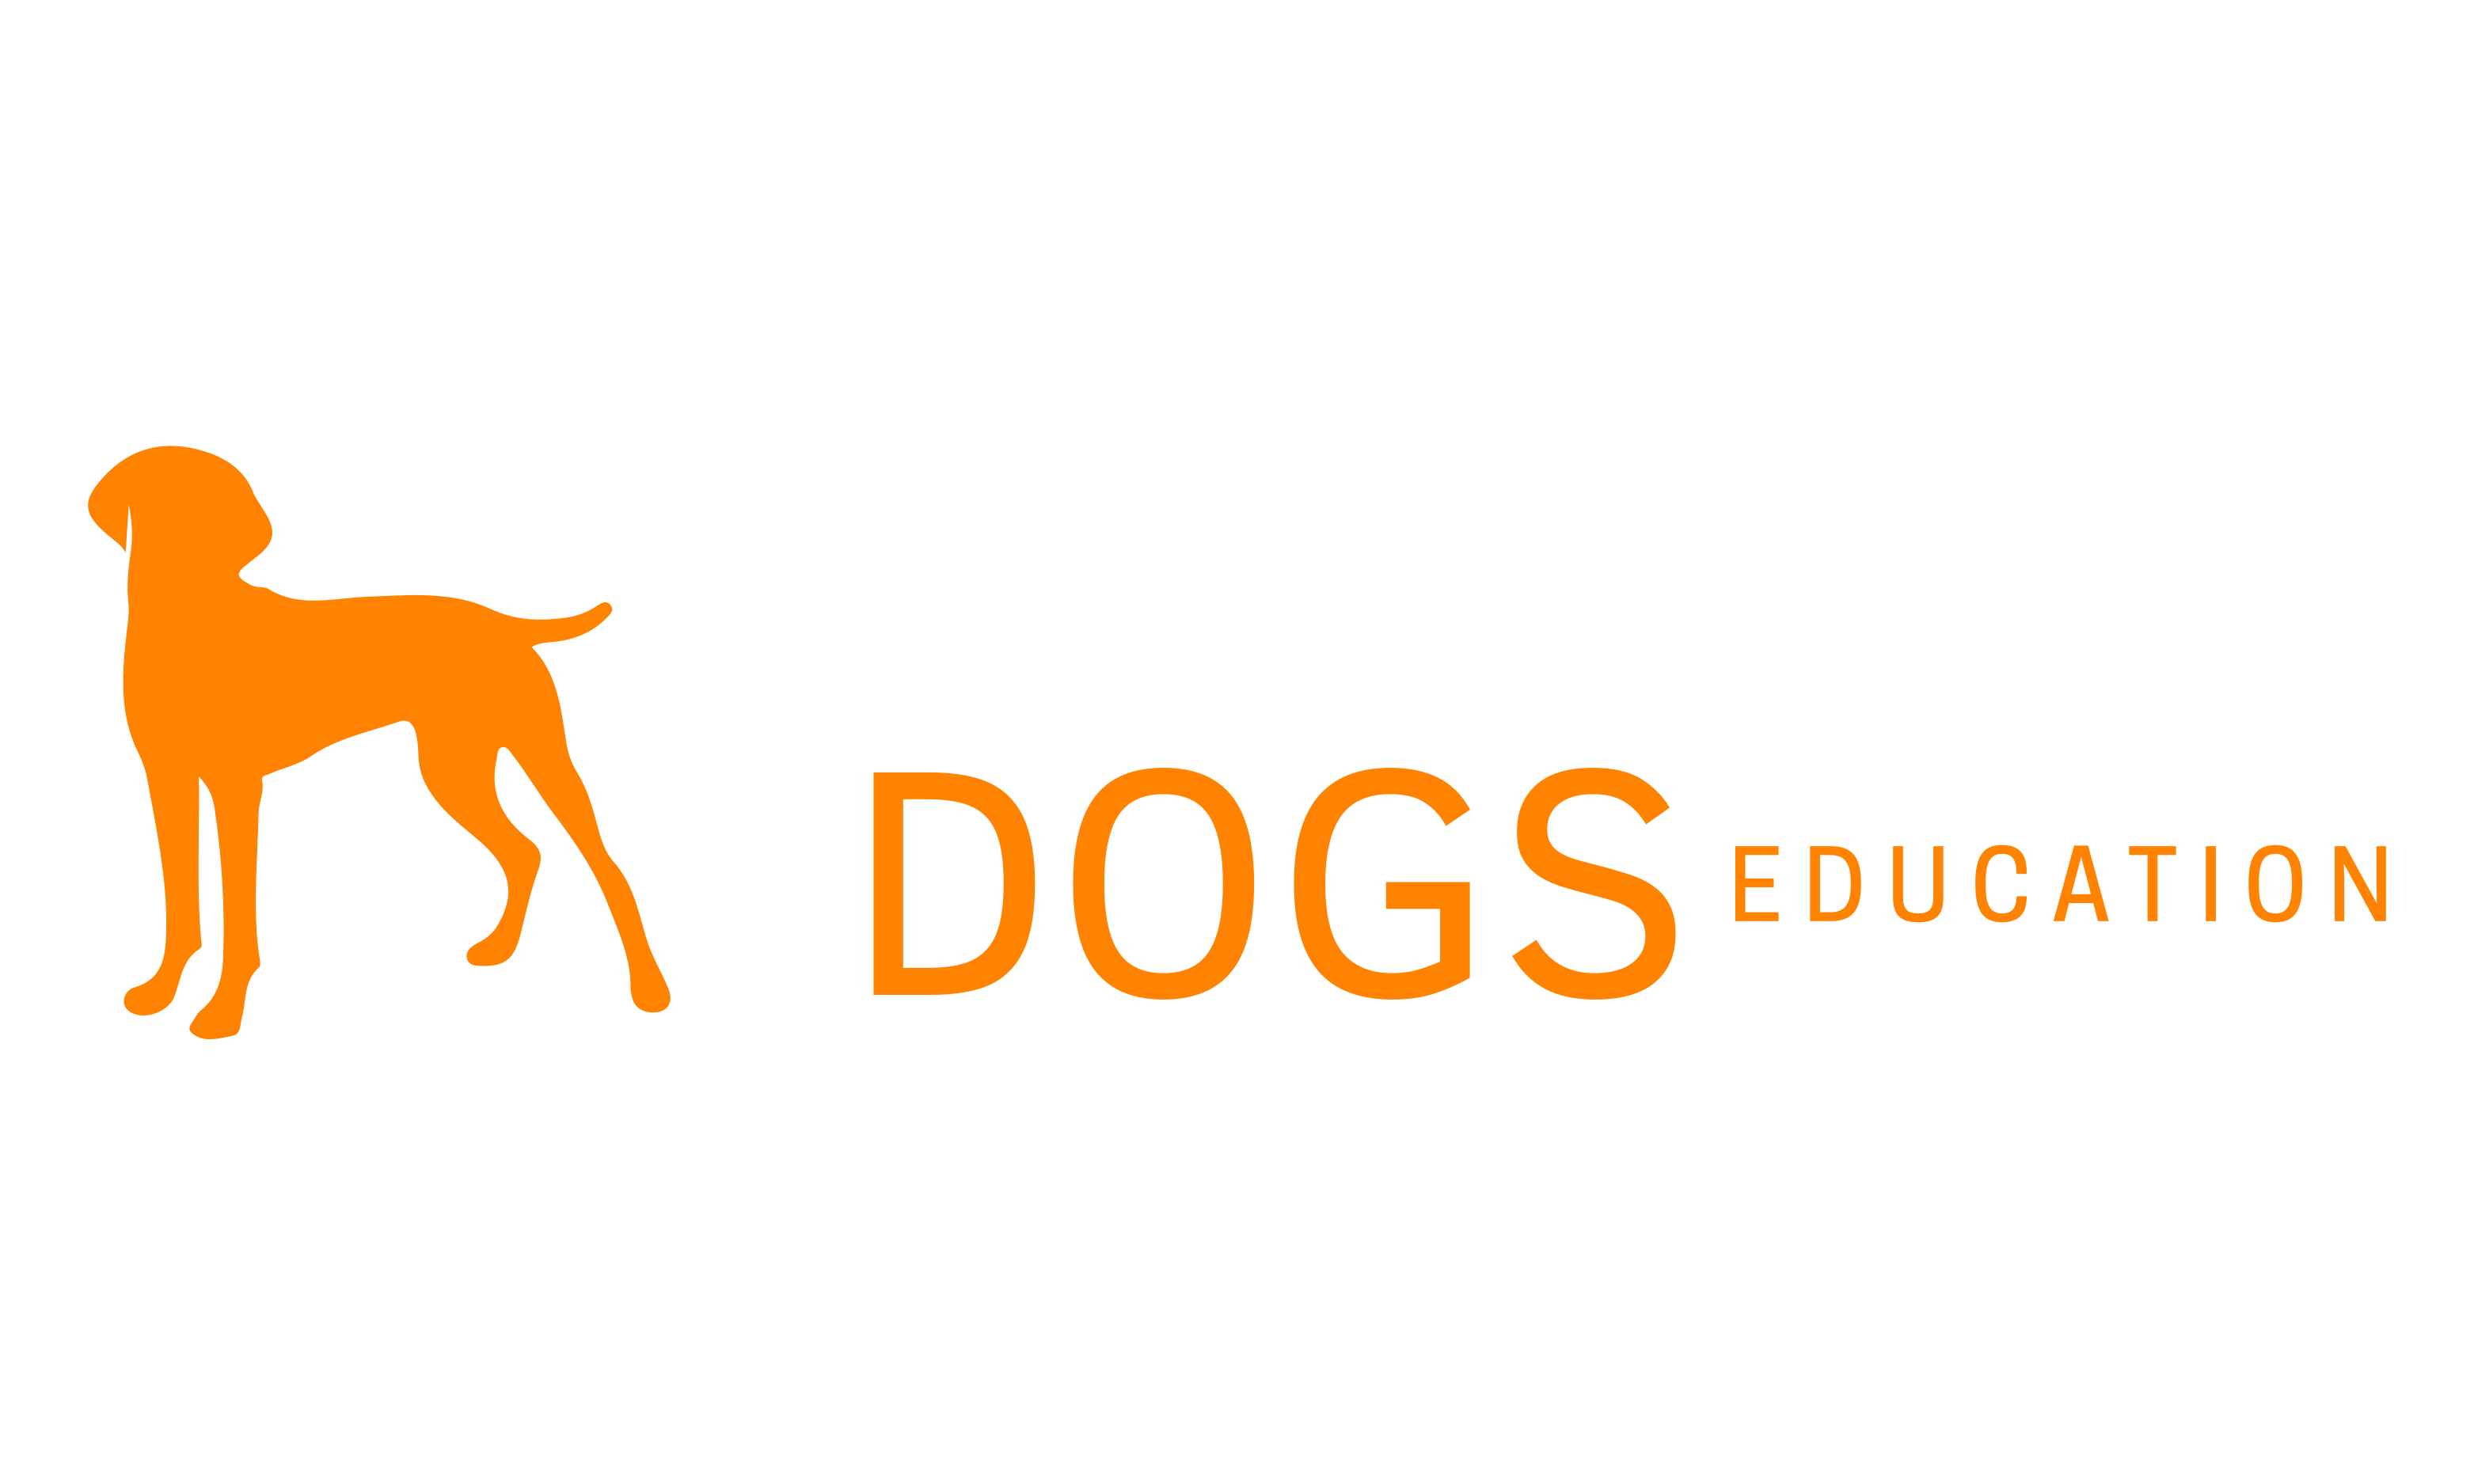 Working Dogs Education